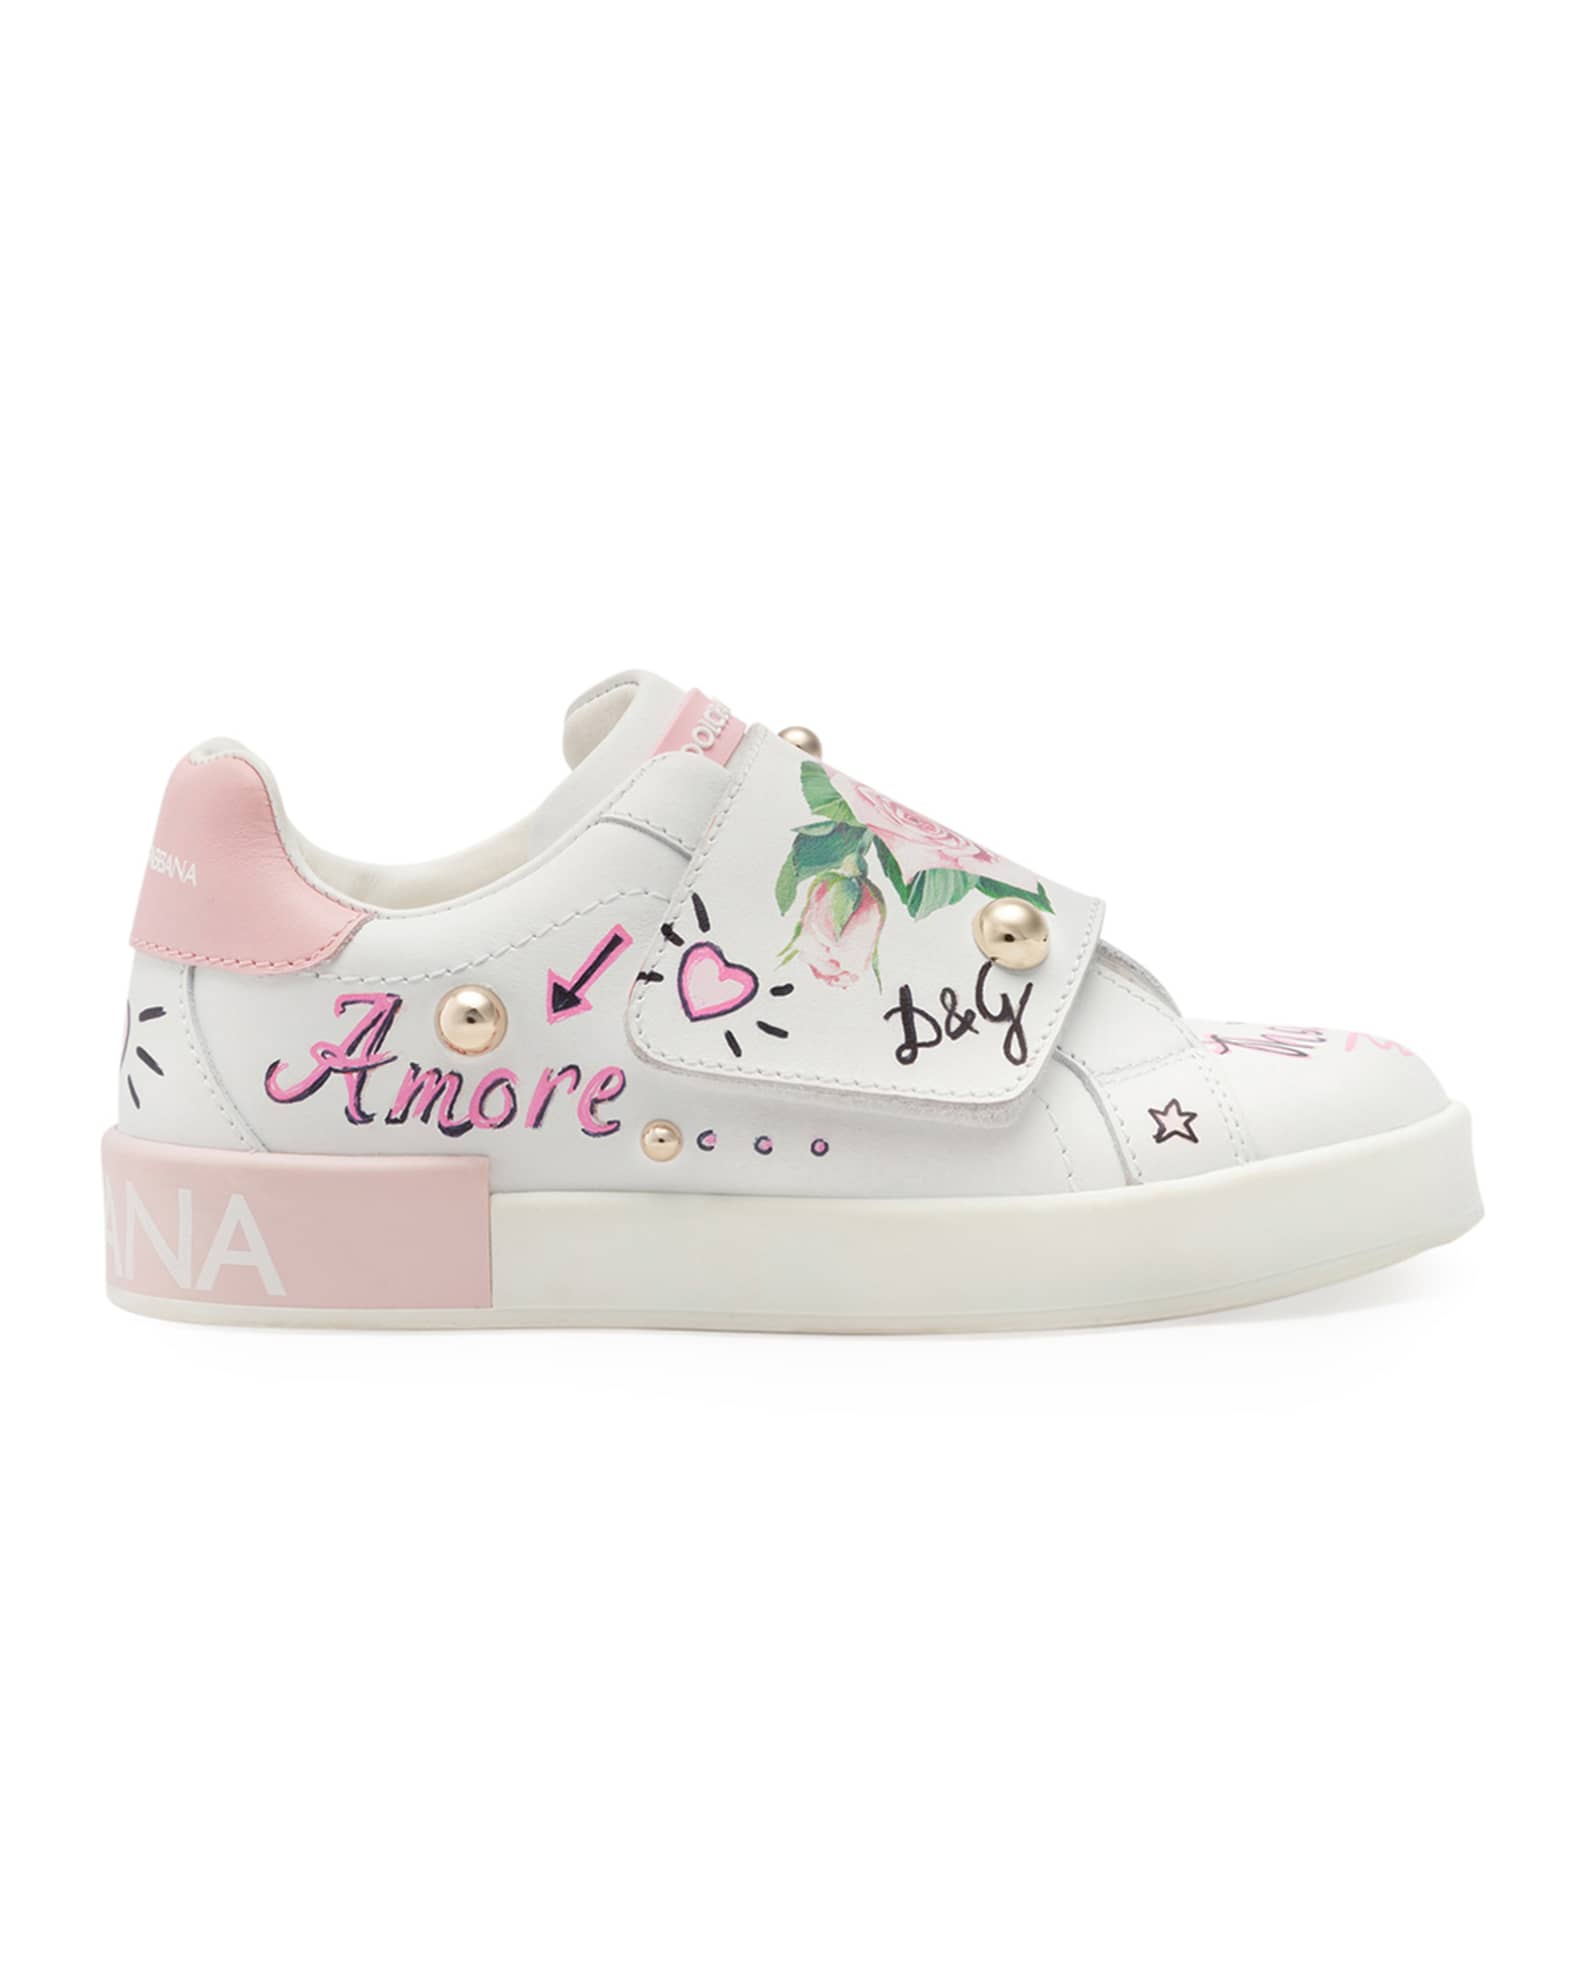 Floral Print Grip-Strap Leather Sneakers, Toddler 0